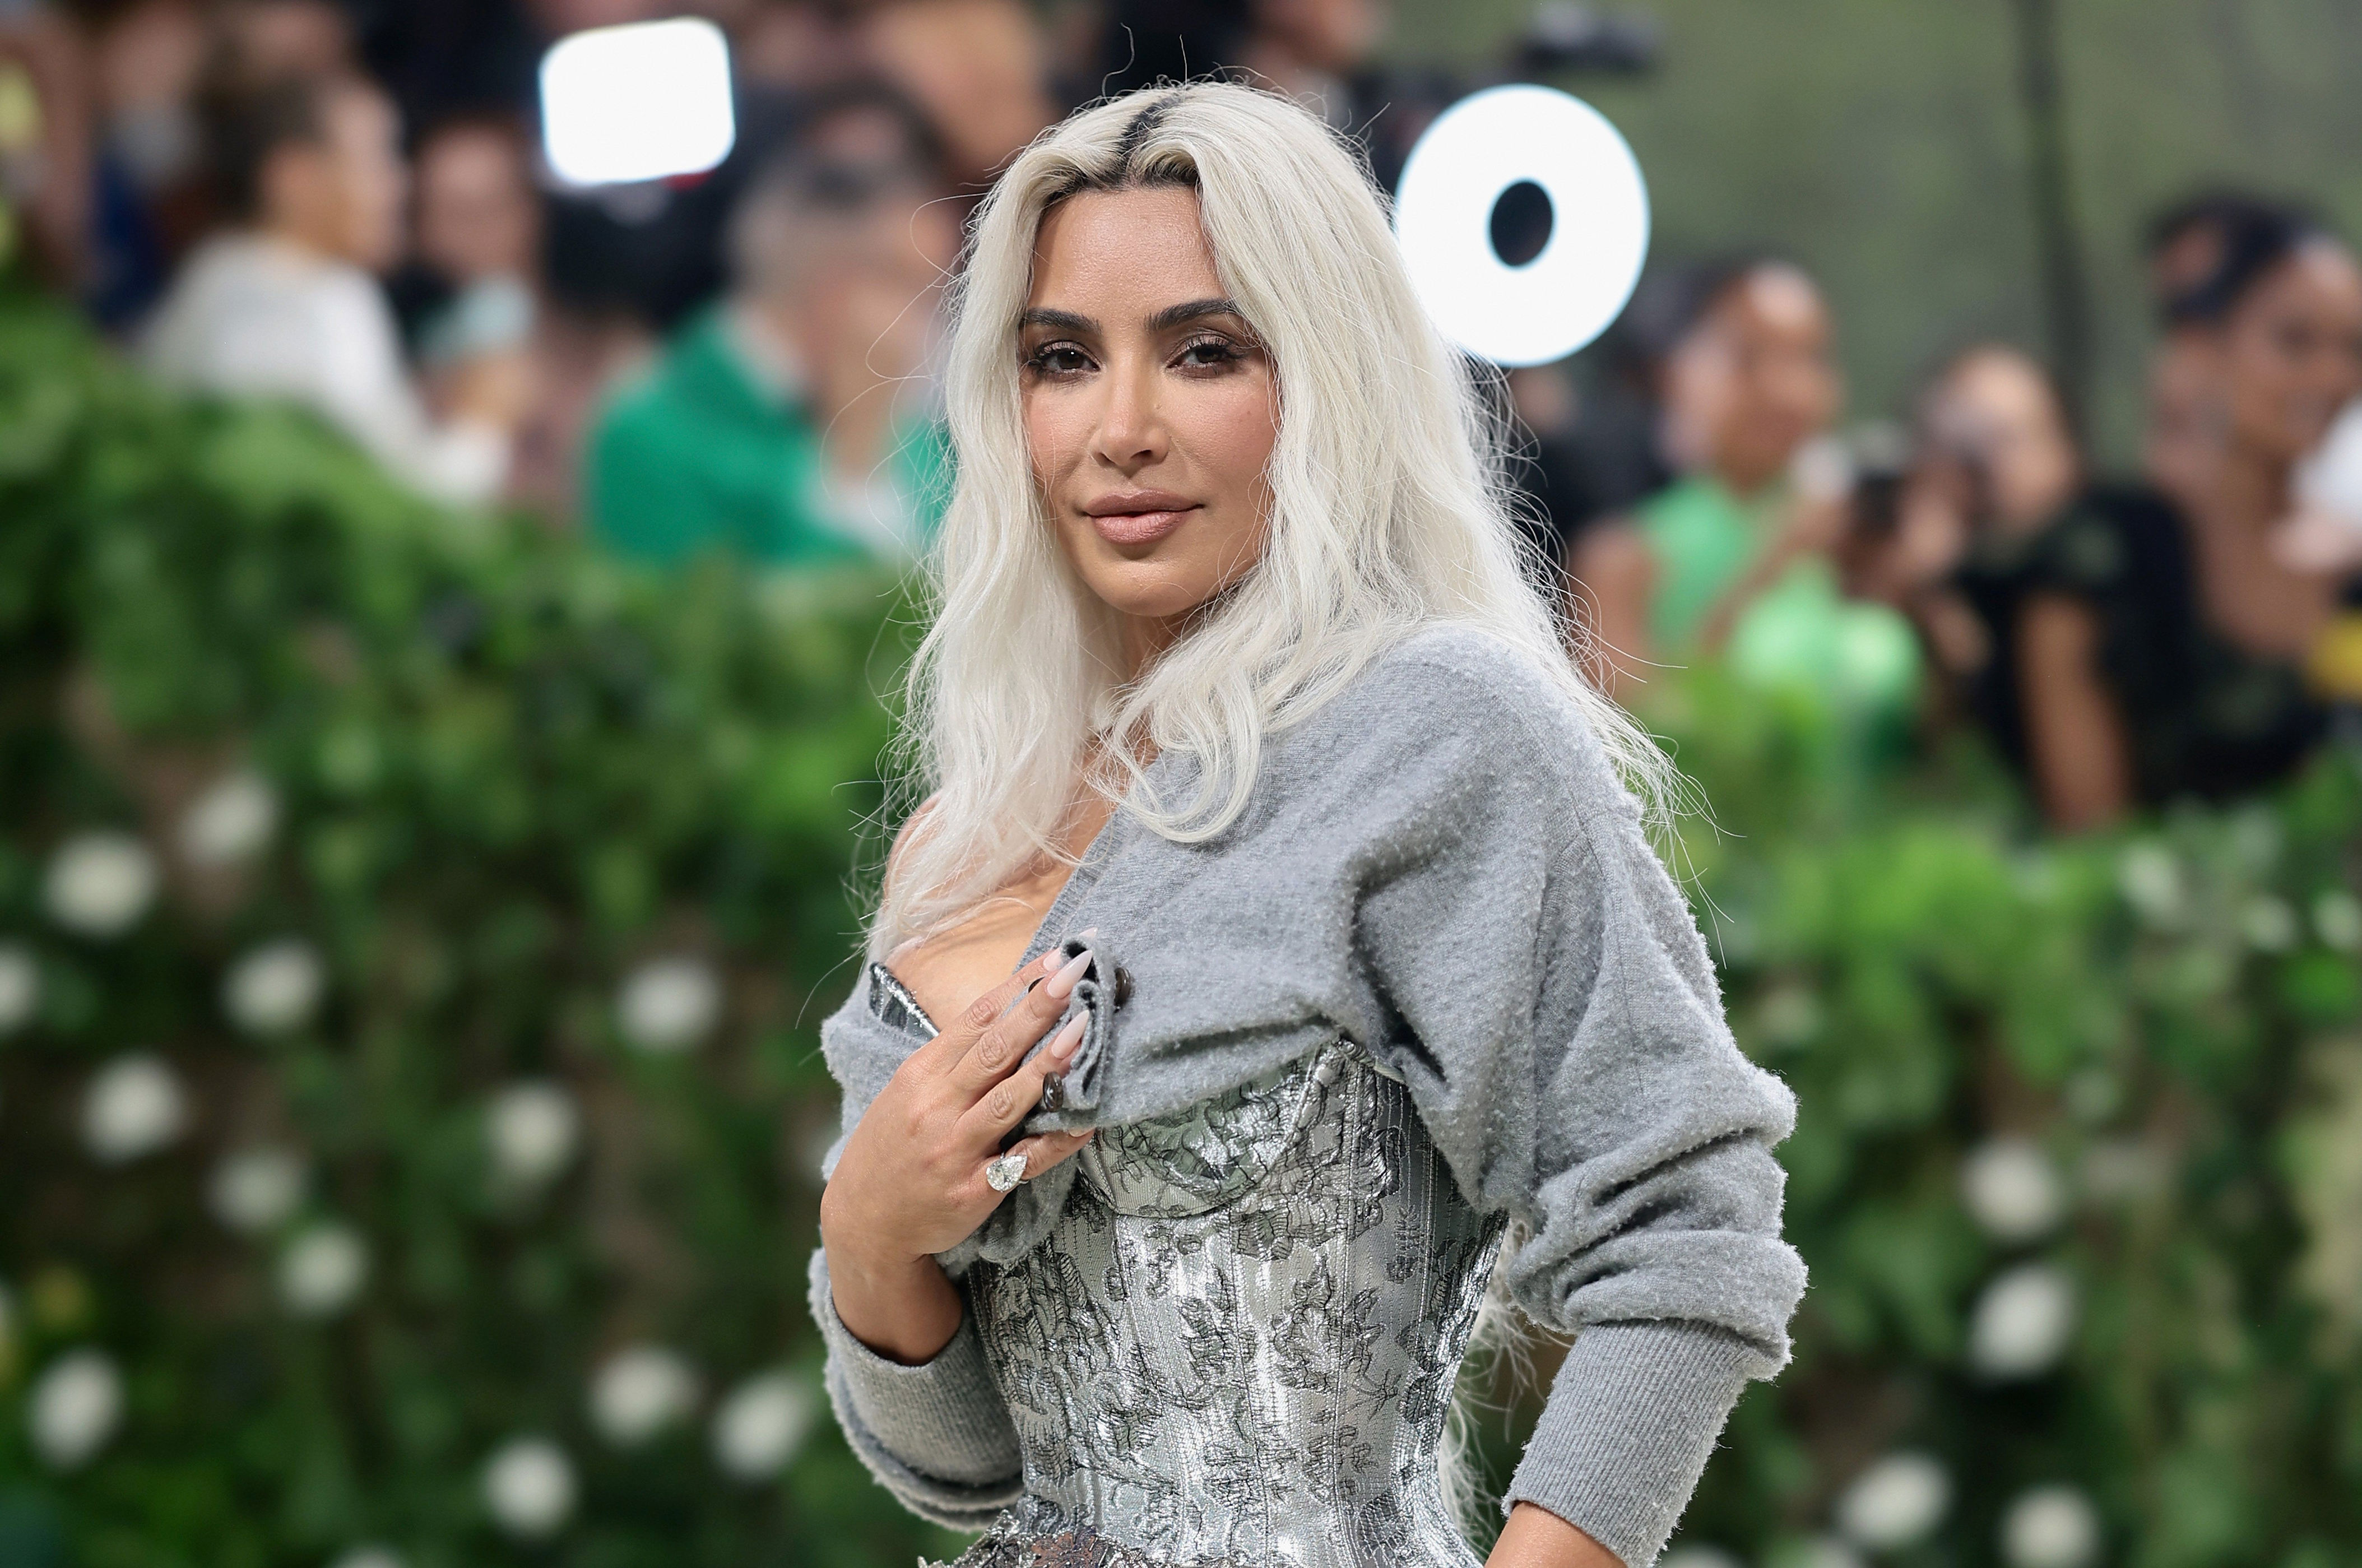 met gala fans confused by kim kardashian’s incongruous accessory